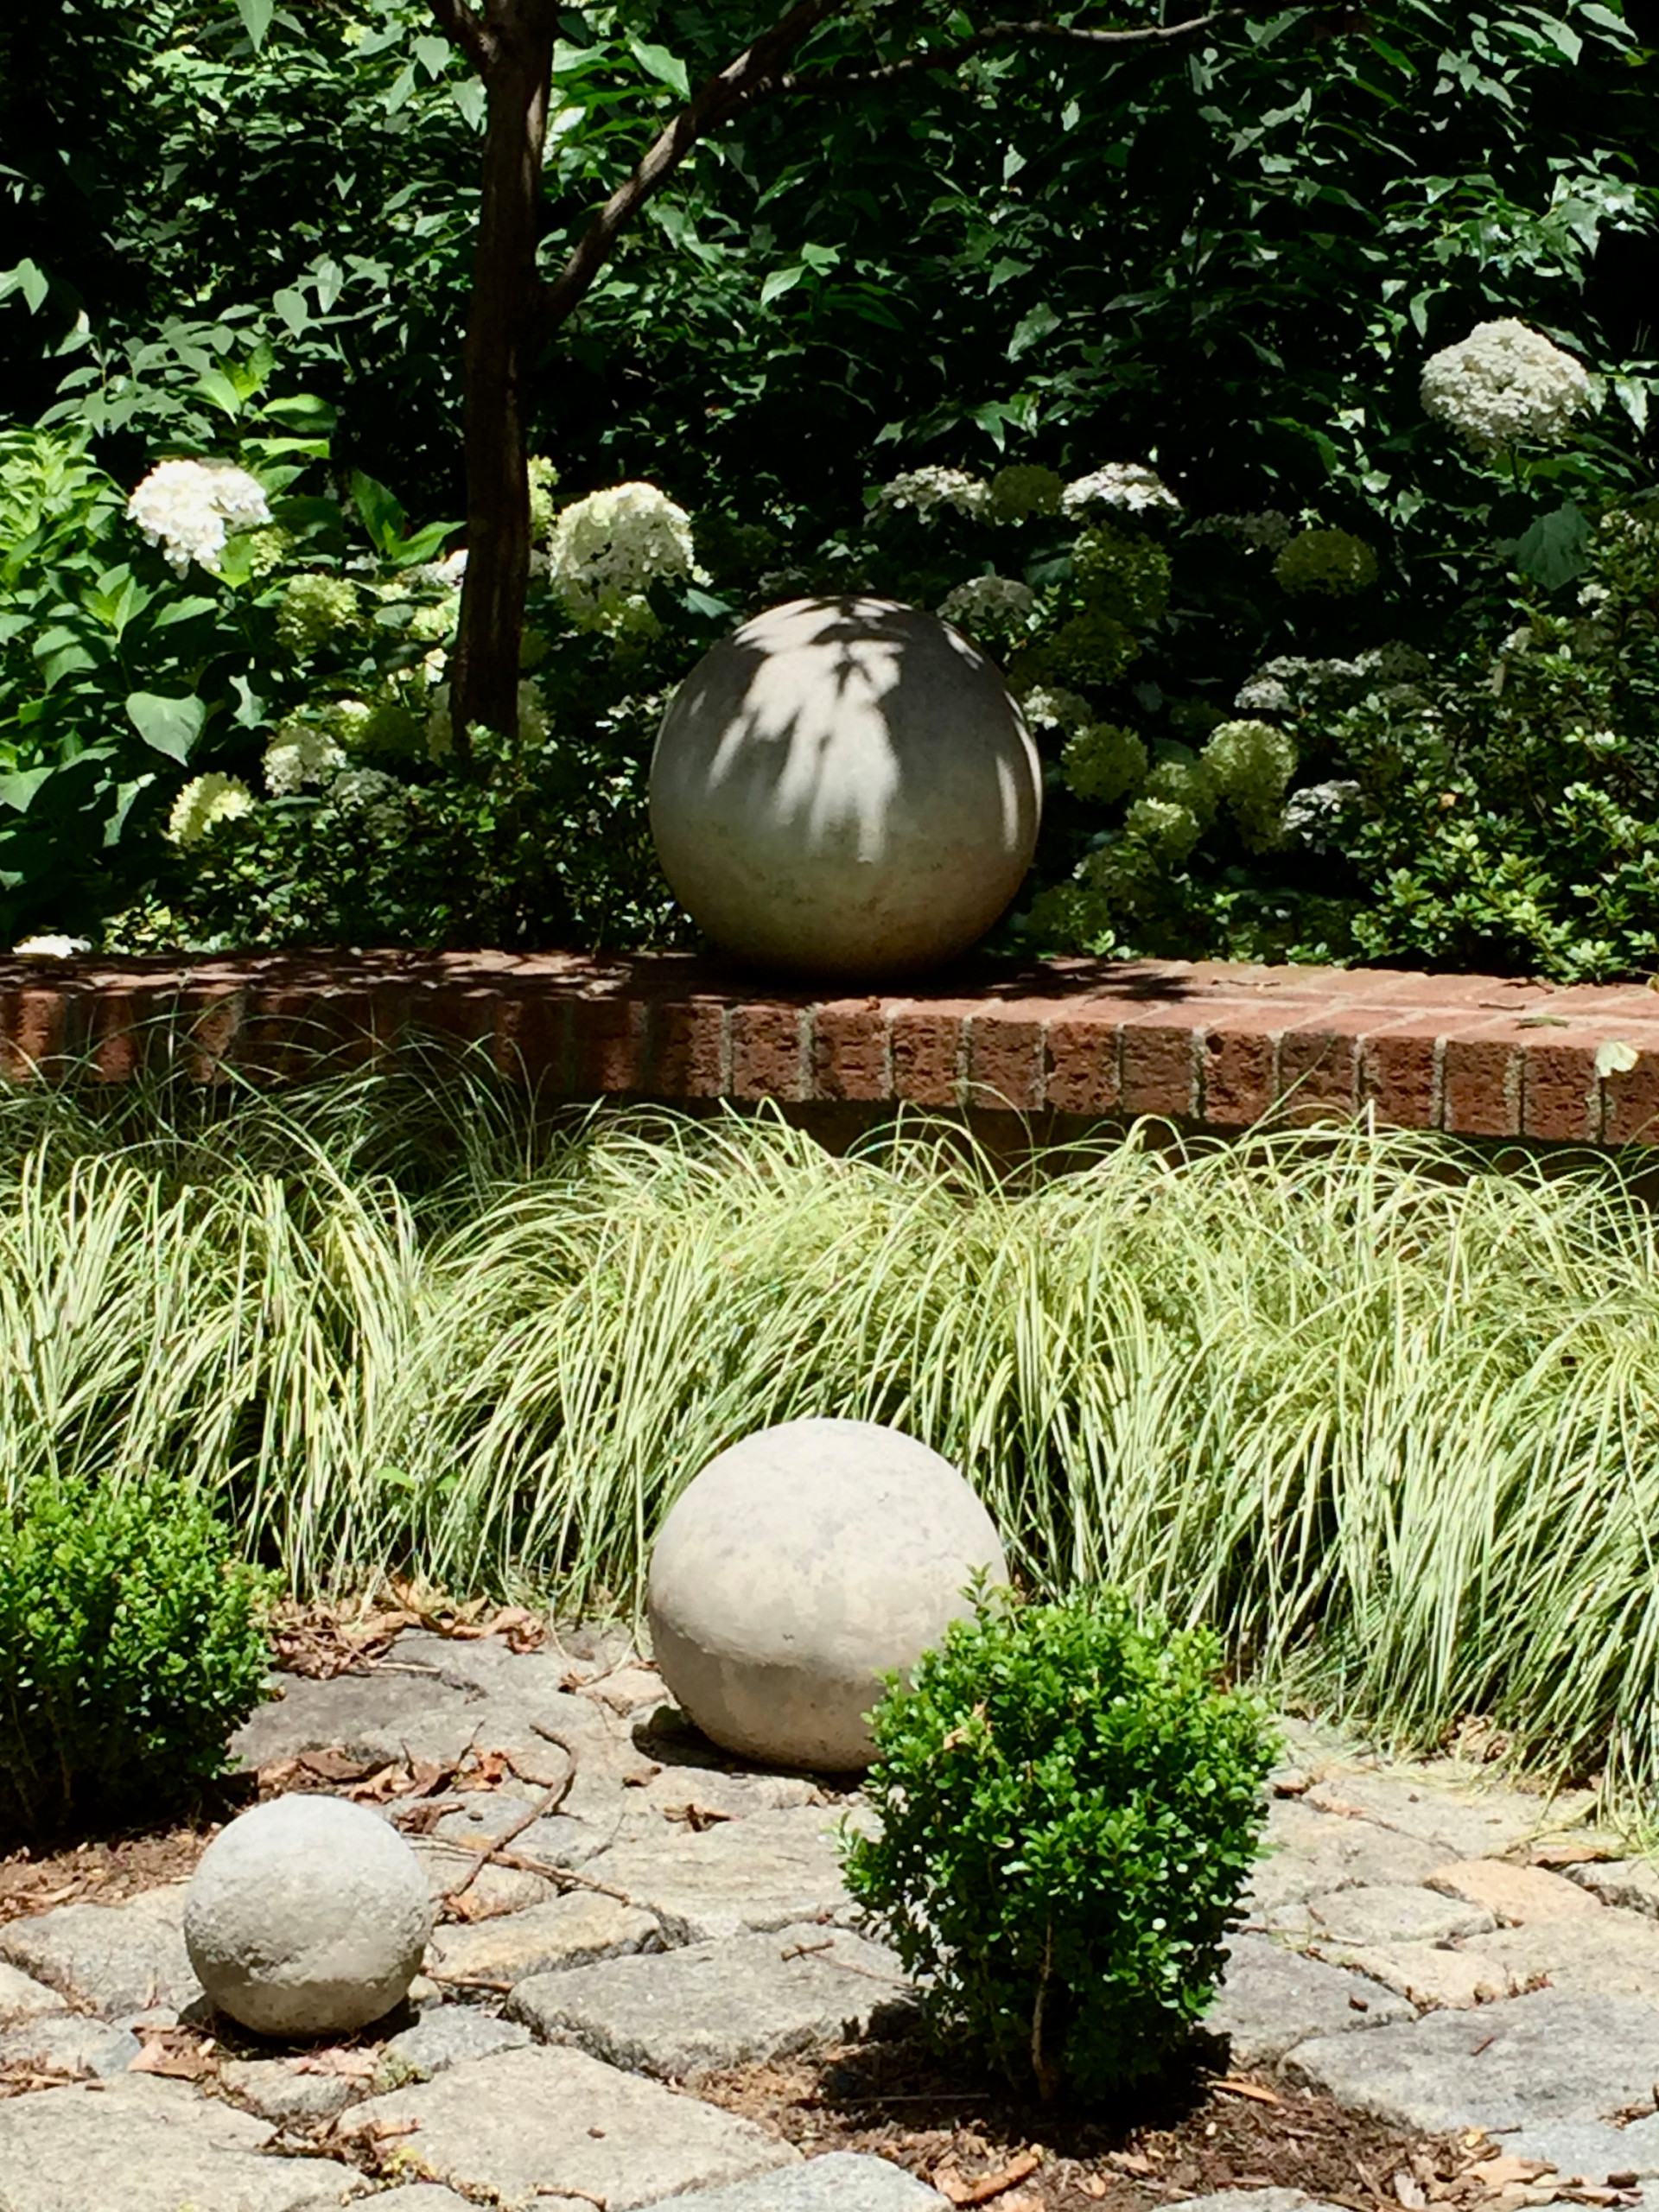 Contemporary Touch to the Traditional Garden.